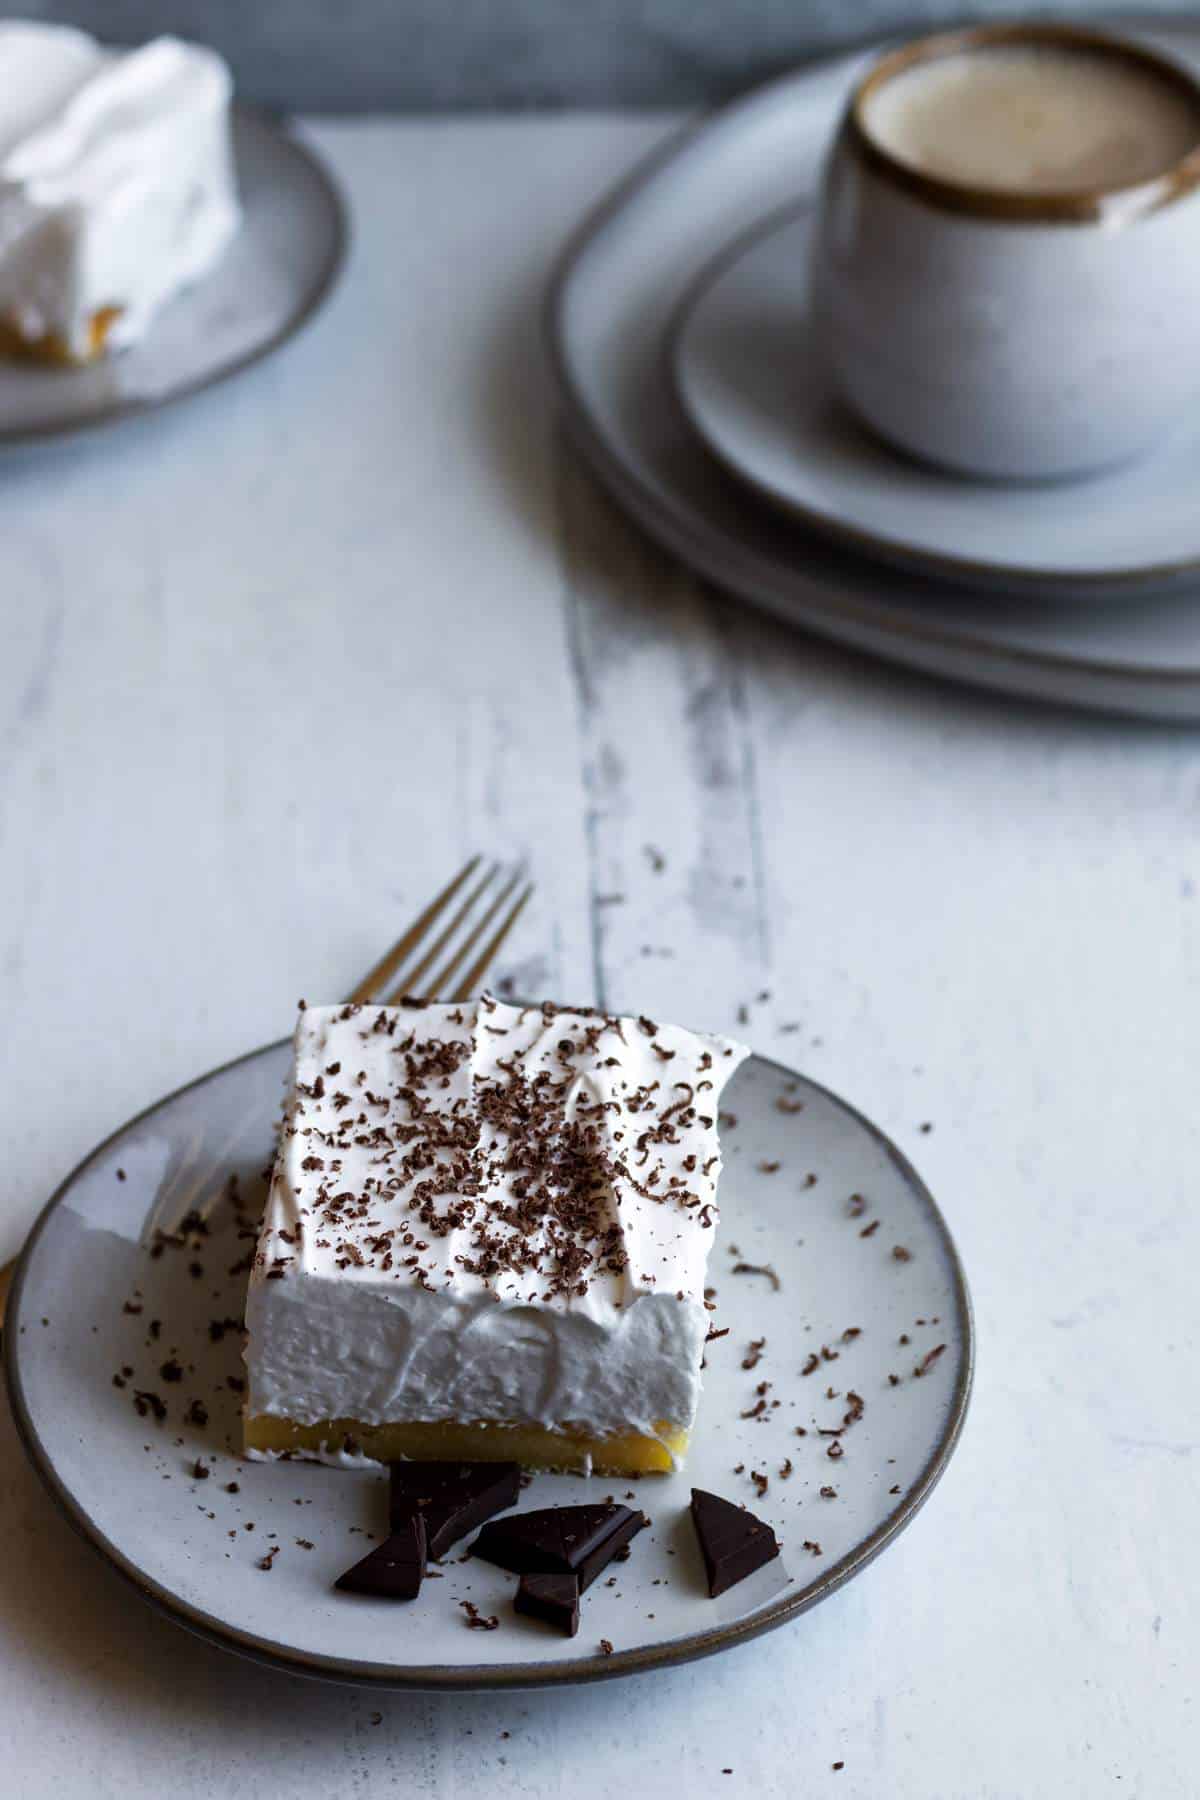 Lemon meringue slice on a plate with chocolate pieces.